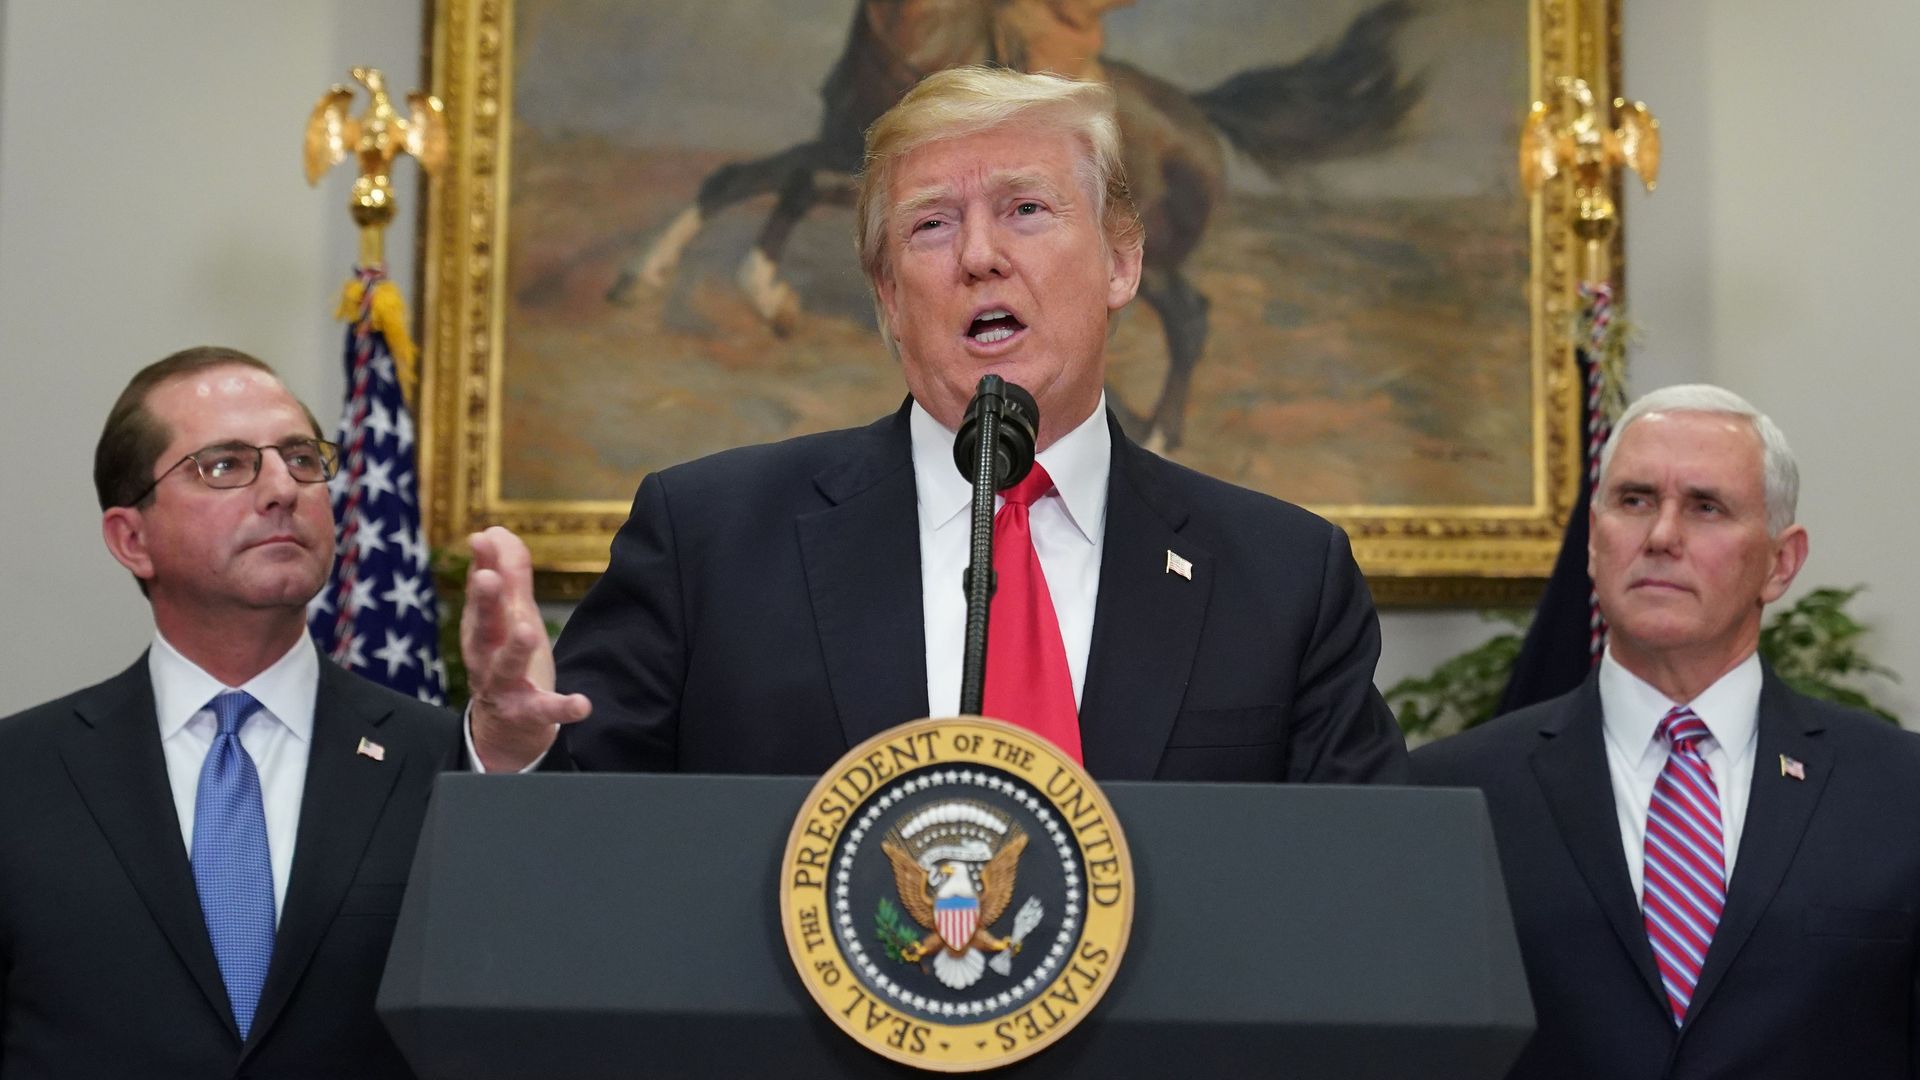 In this image, Trump speaks into a microphone at a podium in the White House, with a portrait of Teddy Roosevelt behind him.